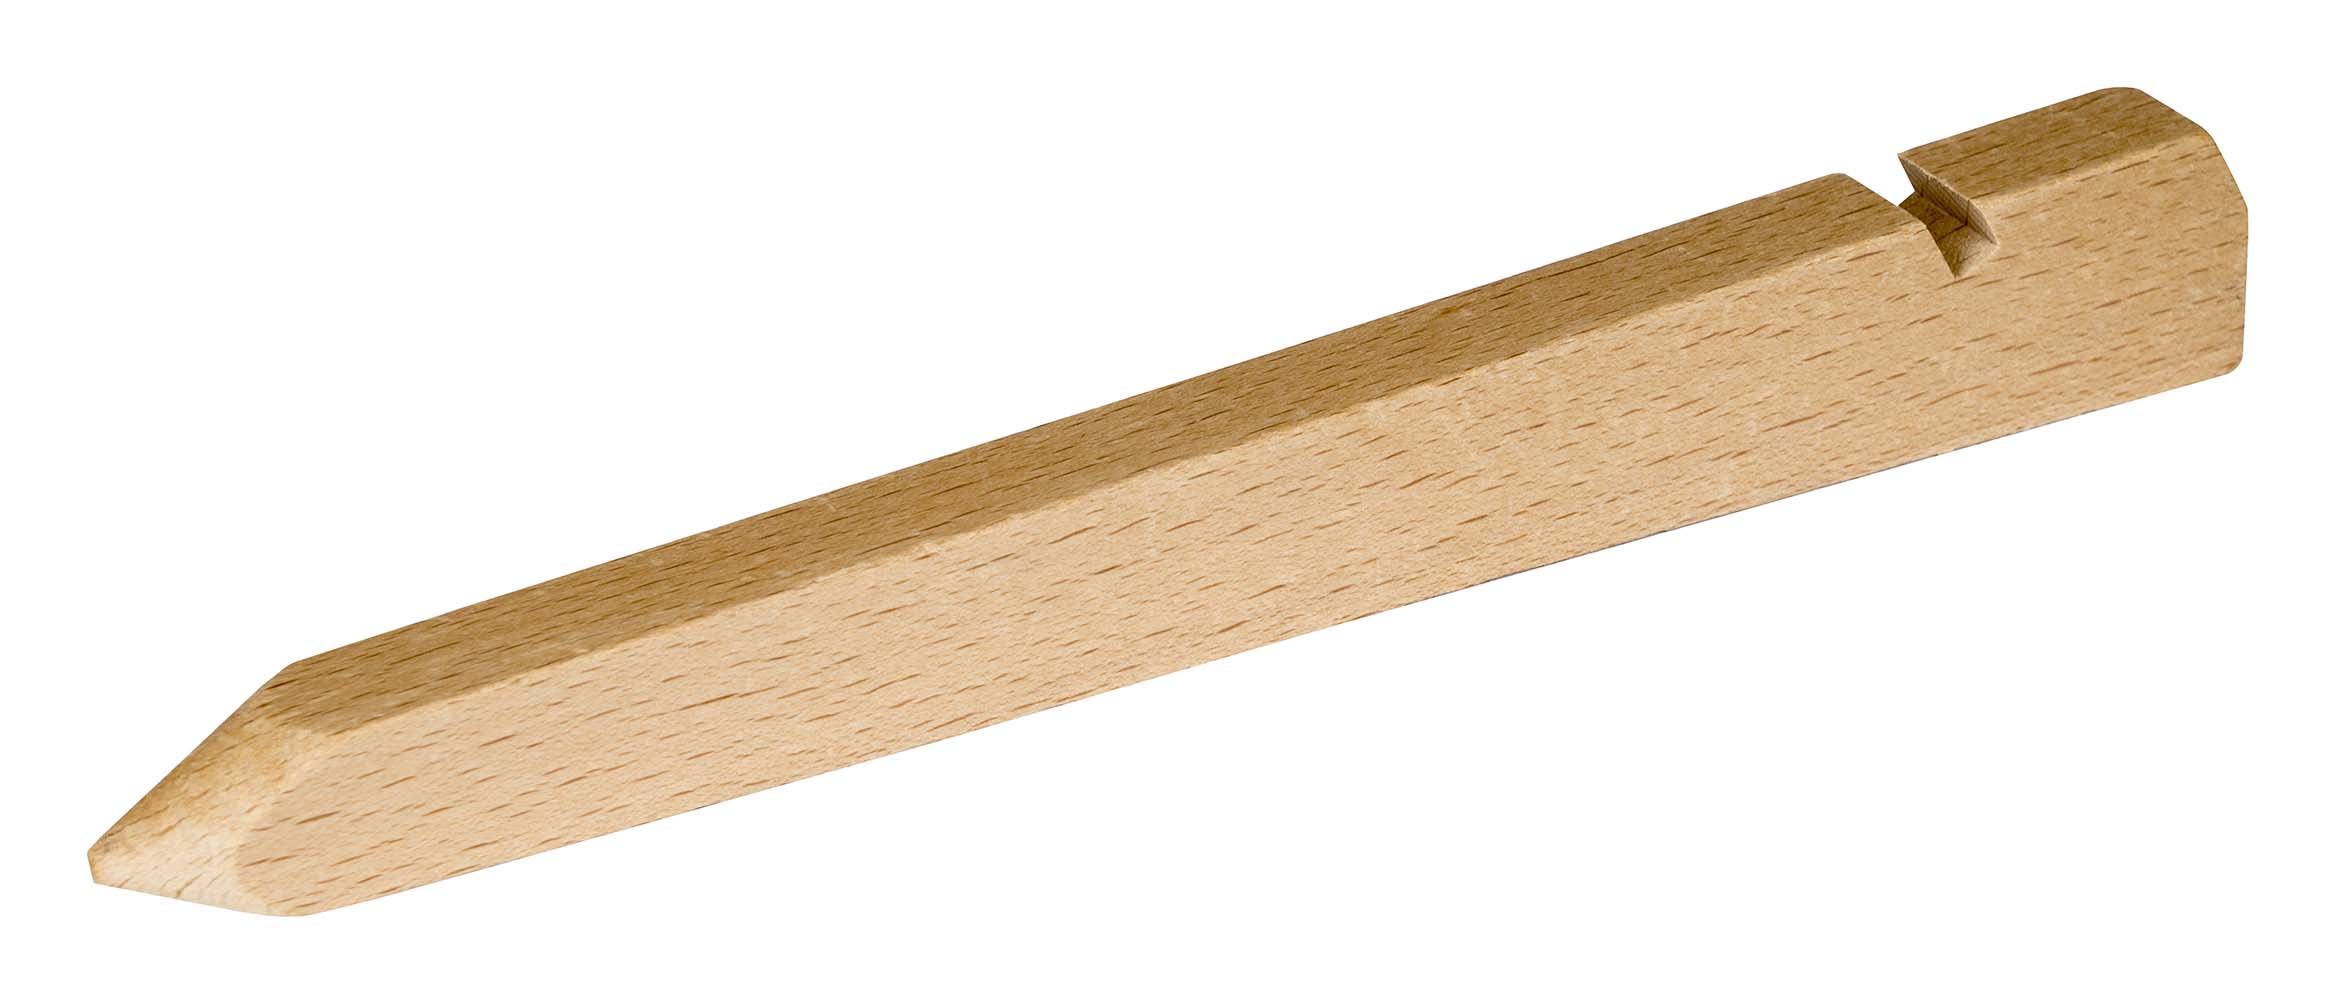 4114380 An extra strong and broad wooden peg. Suitable for soft ground, sandy ground or waterlogged ground. Ideal for anchoring a tent, canvas, tarpaulin and such. Features a notch for attachment of a guy rope